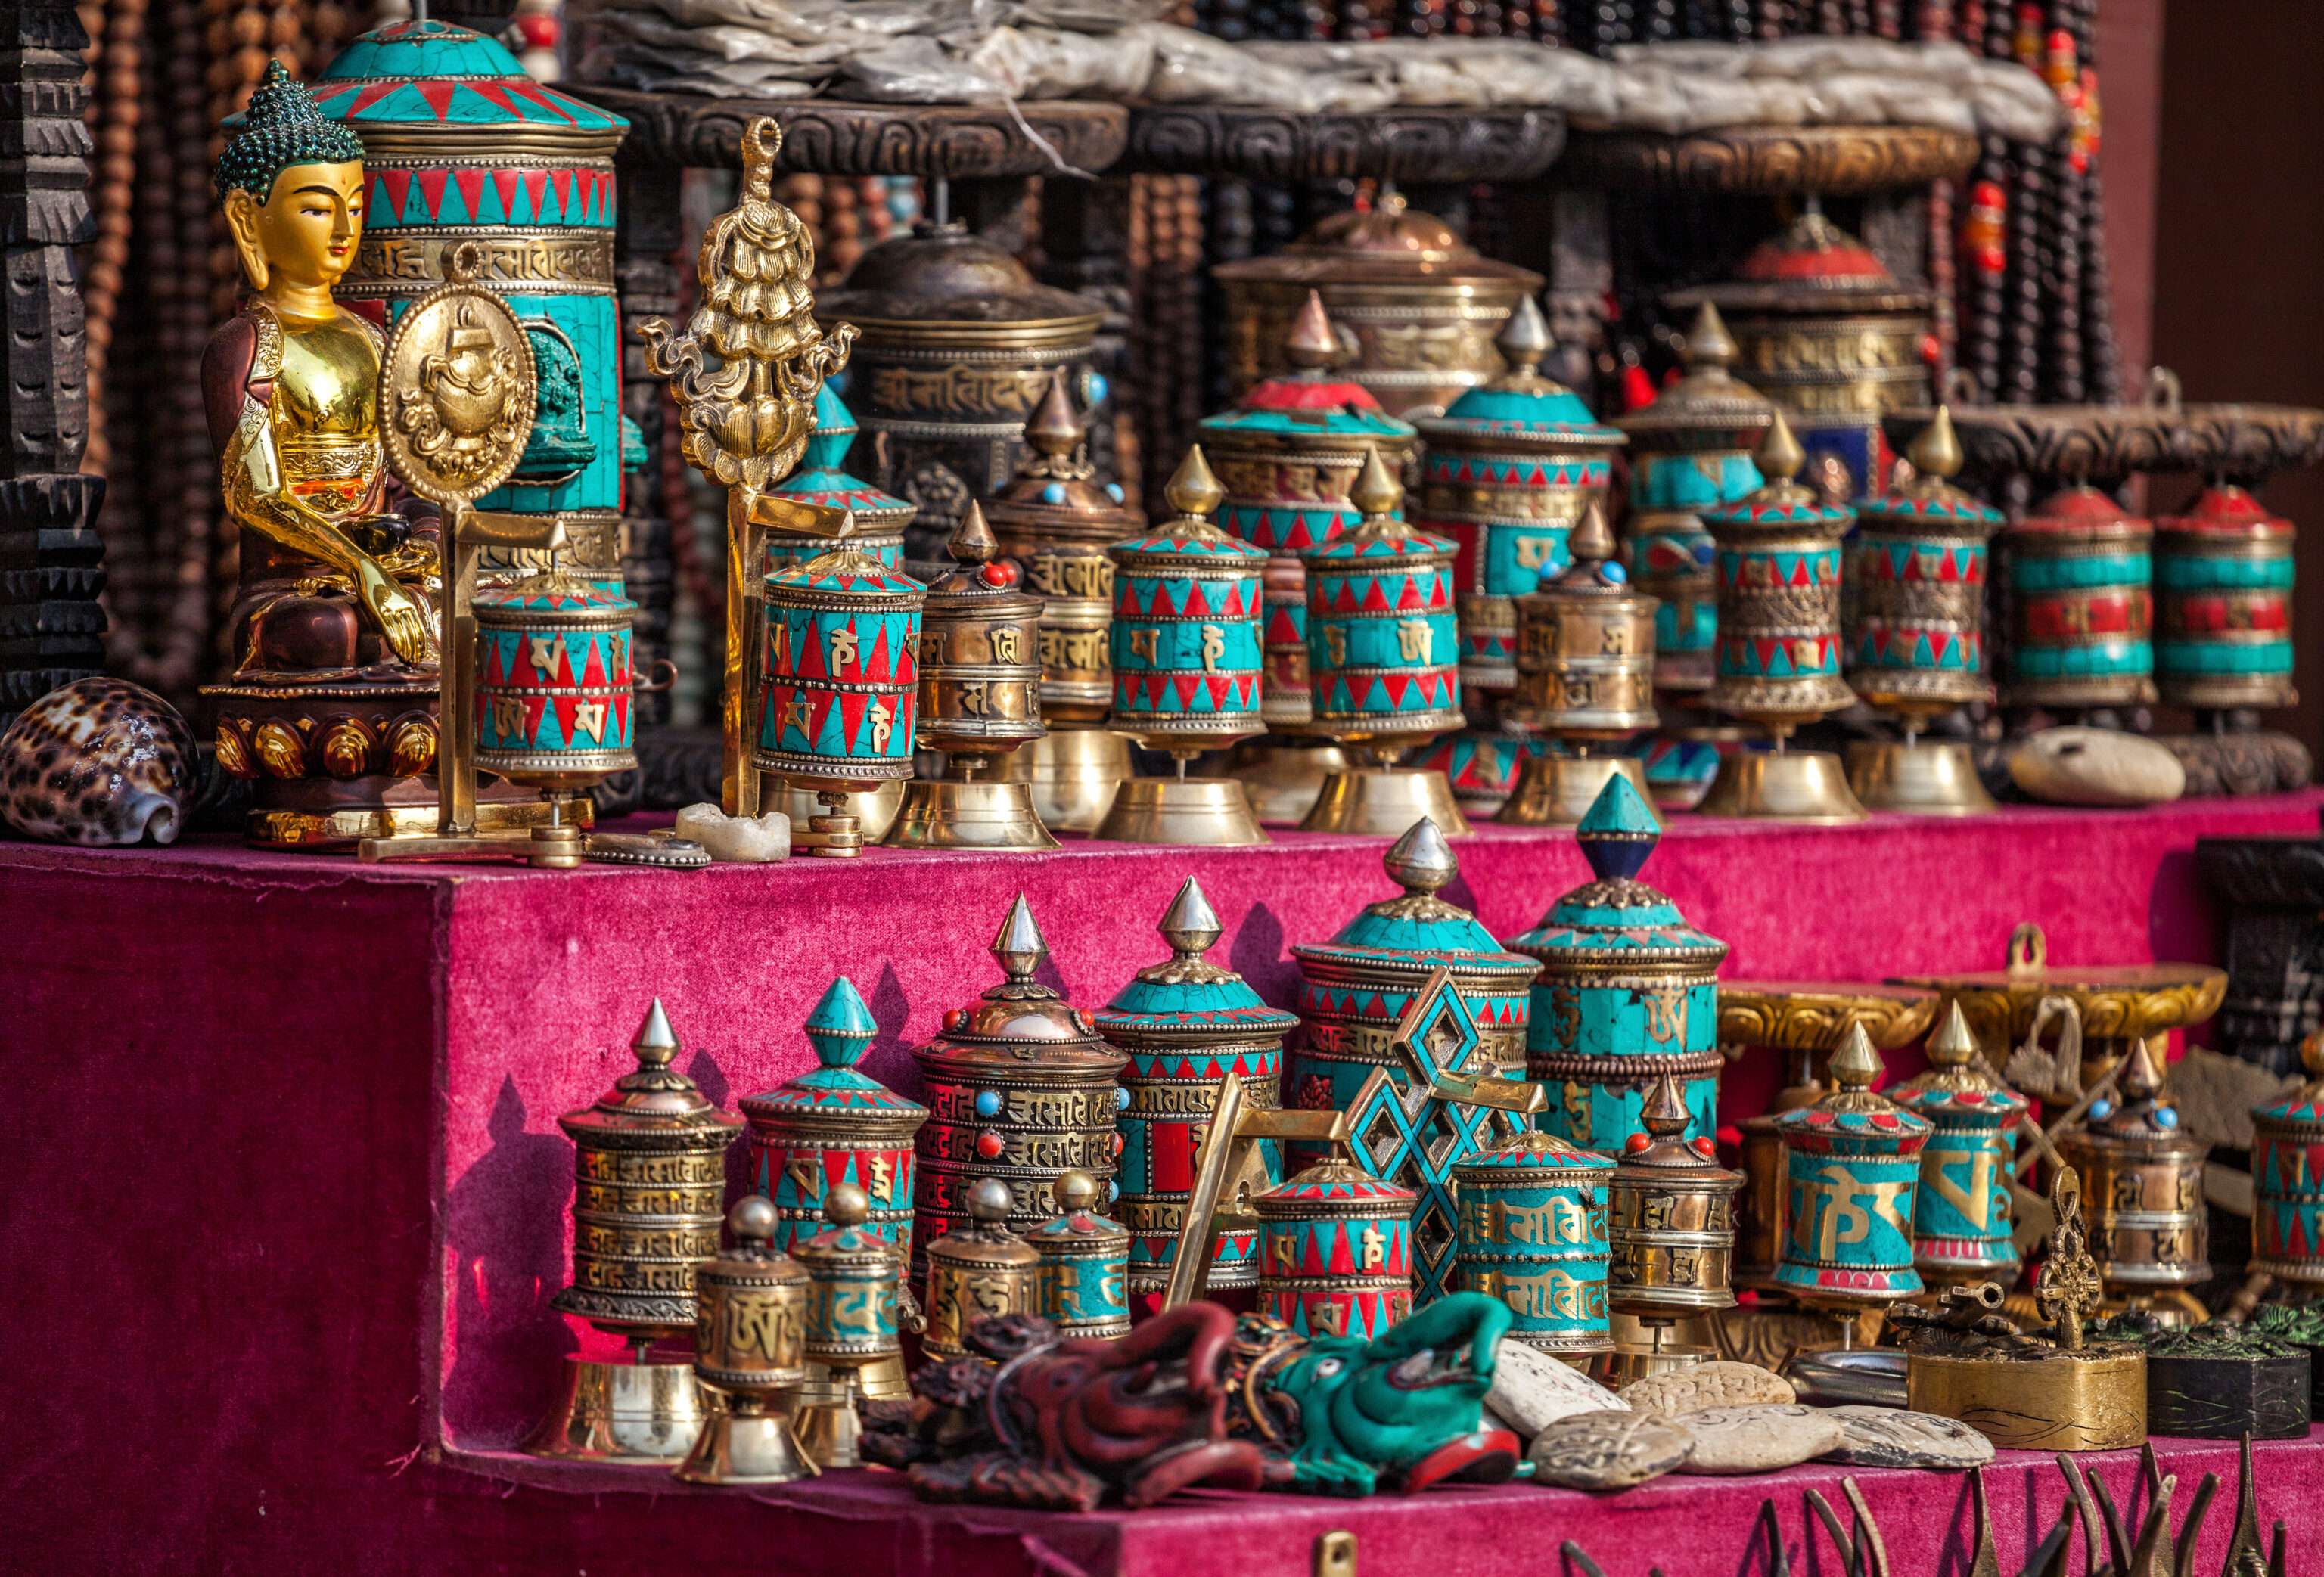 Prayer,Wheels,From,Turquoise,Stone,And,Other,Souvenirs,In,The